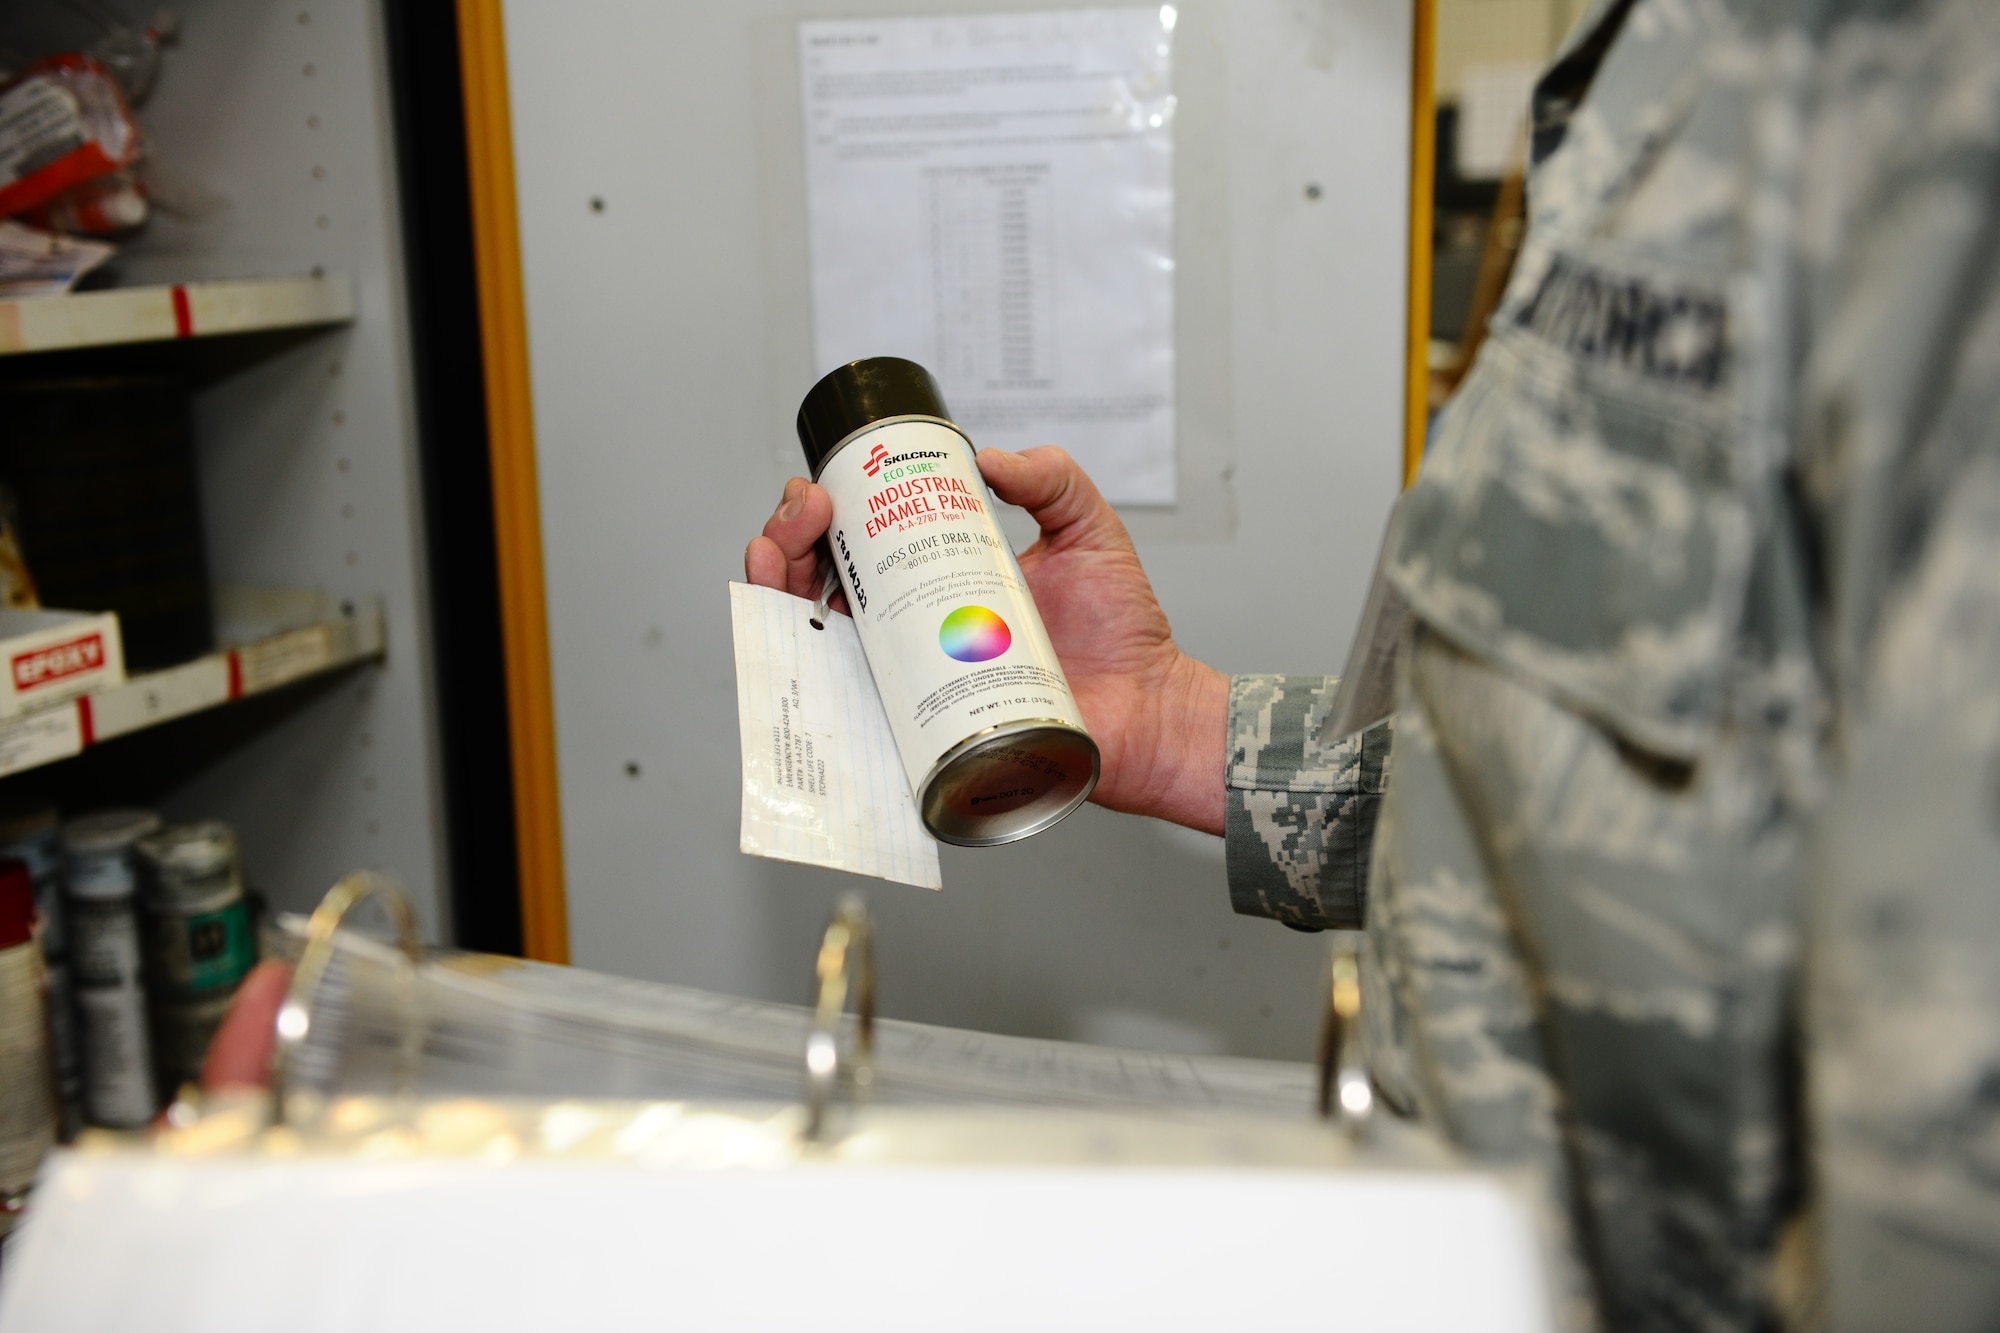 SPANGDAHLEM AIR BASE, Germany – Master Sgt. Chad Haughenbury, U.S. Air Forces in Europe hazardous materials manager, checks an aerosol paint can for correct material saftey data sheet labeling during an Environmental, Safety and Occupational Health Compliance Assessment Management Program evaluation inside the jet propulsion maintenance shop here April 18. The week-long ESOHCAMP assessment gives the base an idea of how its compares to U. S. Air Force and host-nation regulations regarding environmental and occupational safety. This team is made up of 15 USAFE evaluators who assess Spangdahlem AB’s overall health. The base uses the results from the program to help become USAFE’s most environmentally friendly wing. (U.S. Air Force photo by Airman 1st Class Dillon Davis/Released)